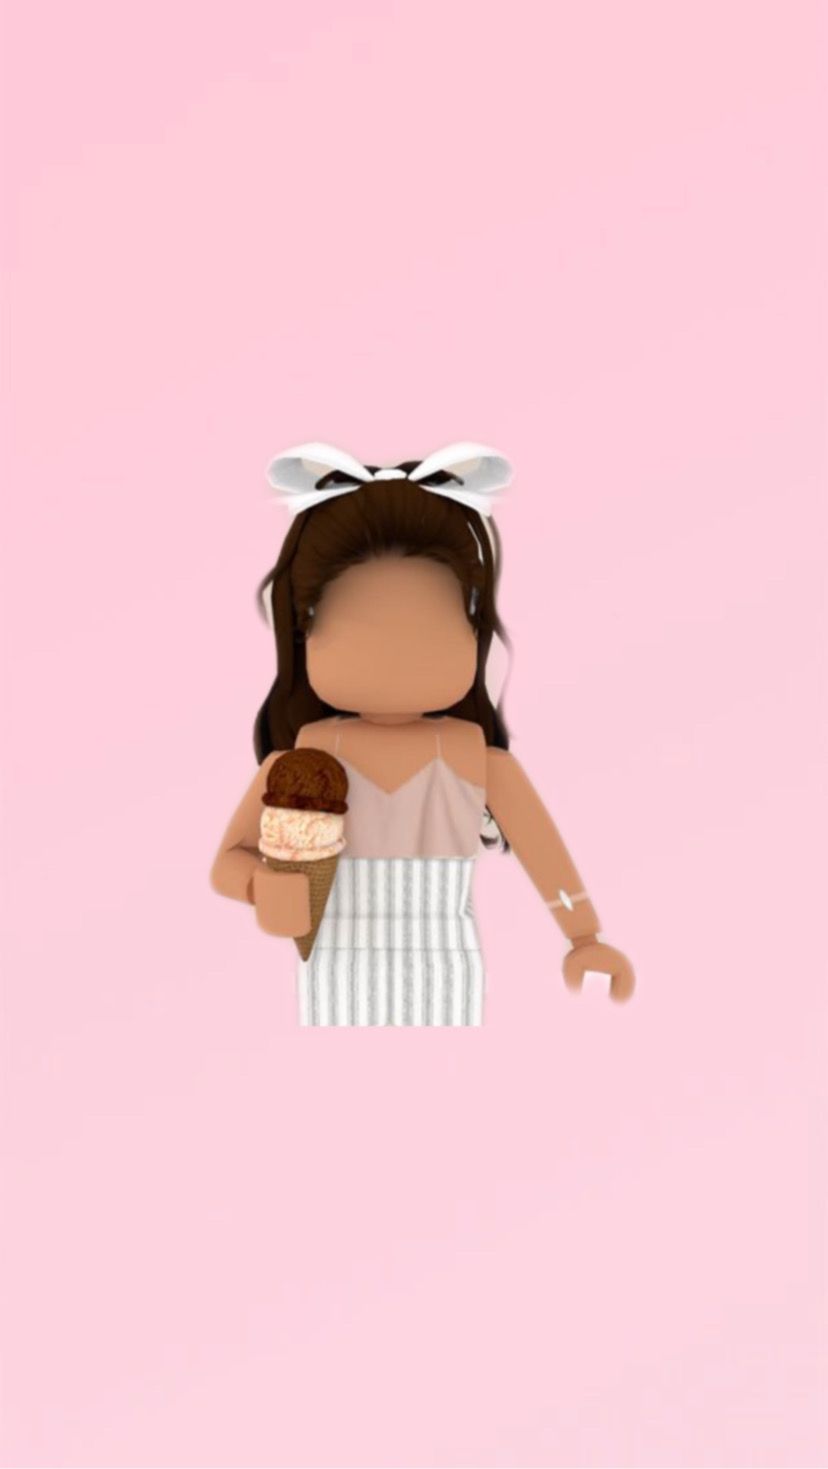 Roblox Black Girls Wallpapers Wallpaper Cave - roblox profile picture black girl